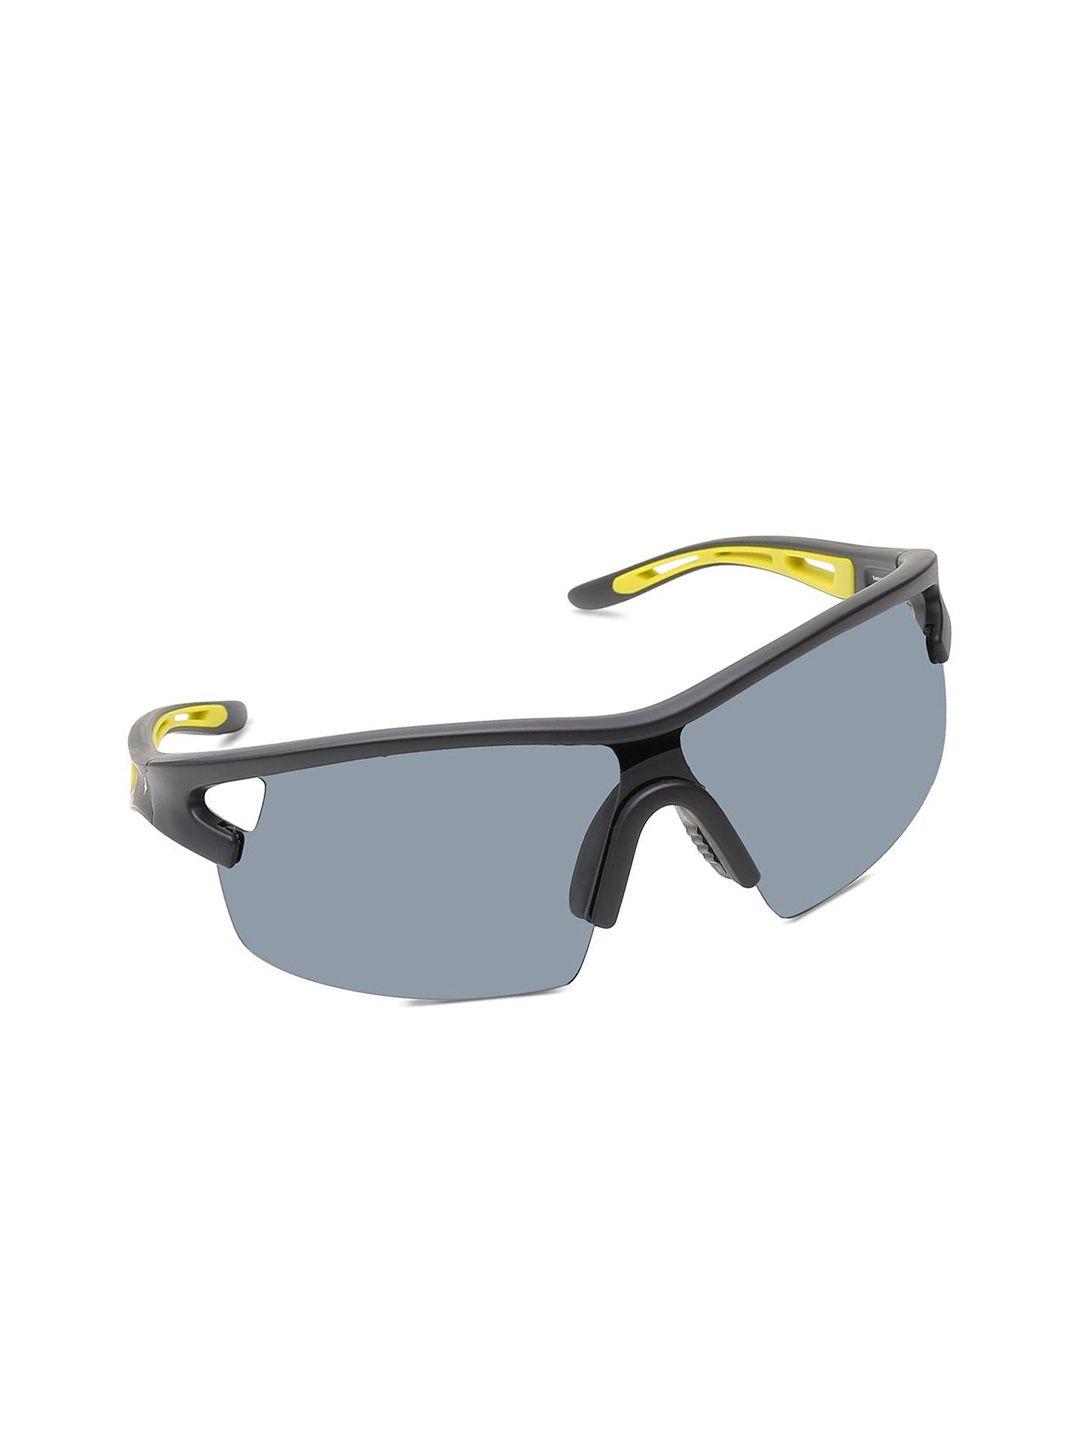 fastrack unisex grey lens & gunmetal-toned sports sunglasses with uv protected lens